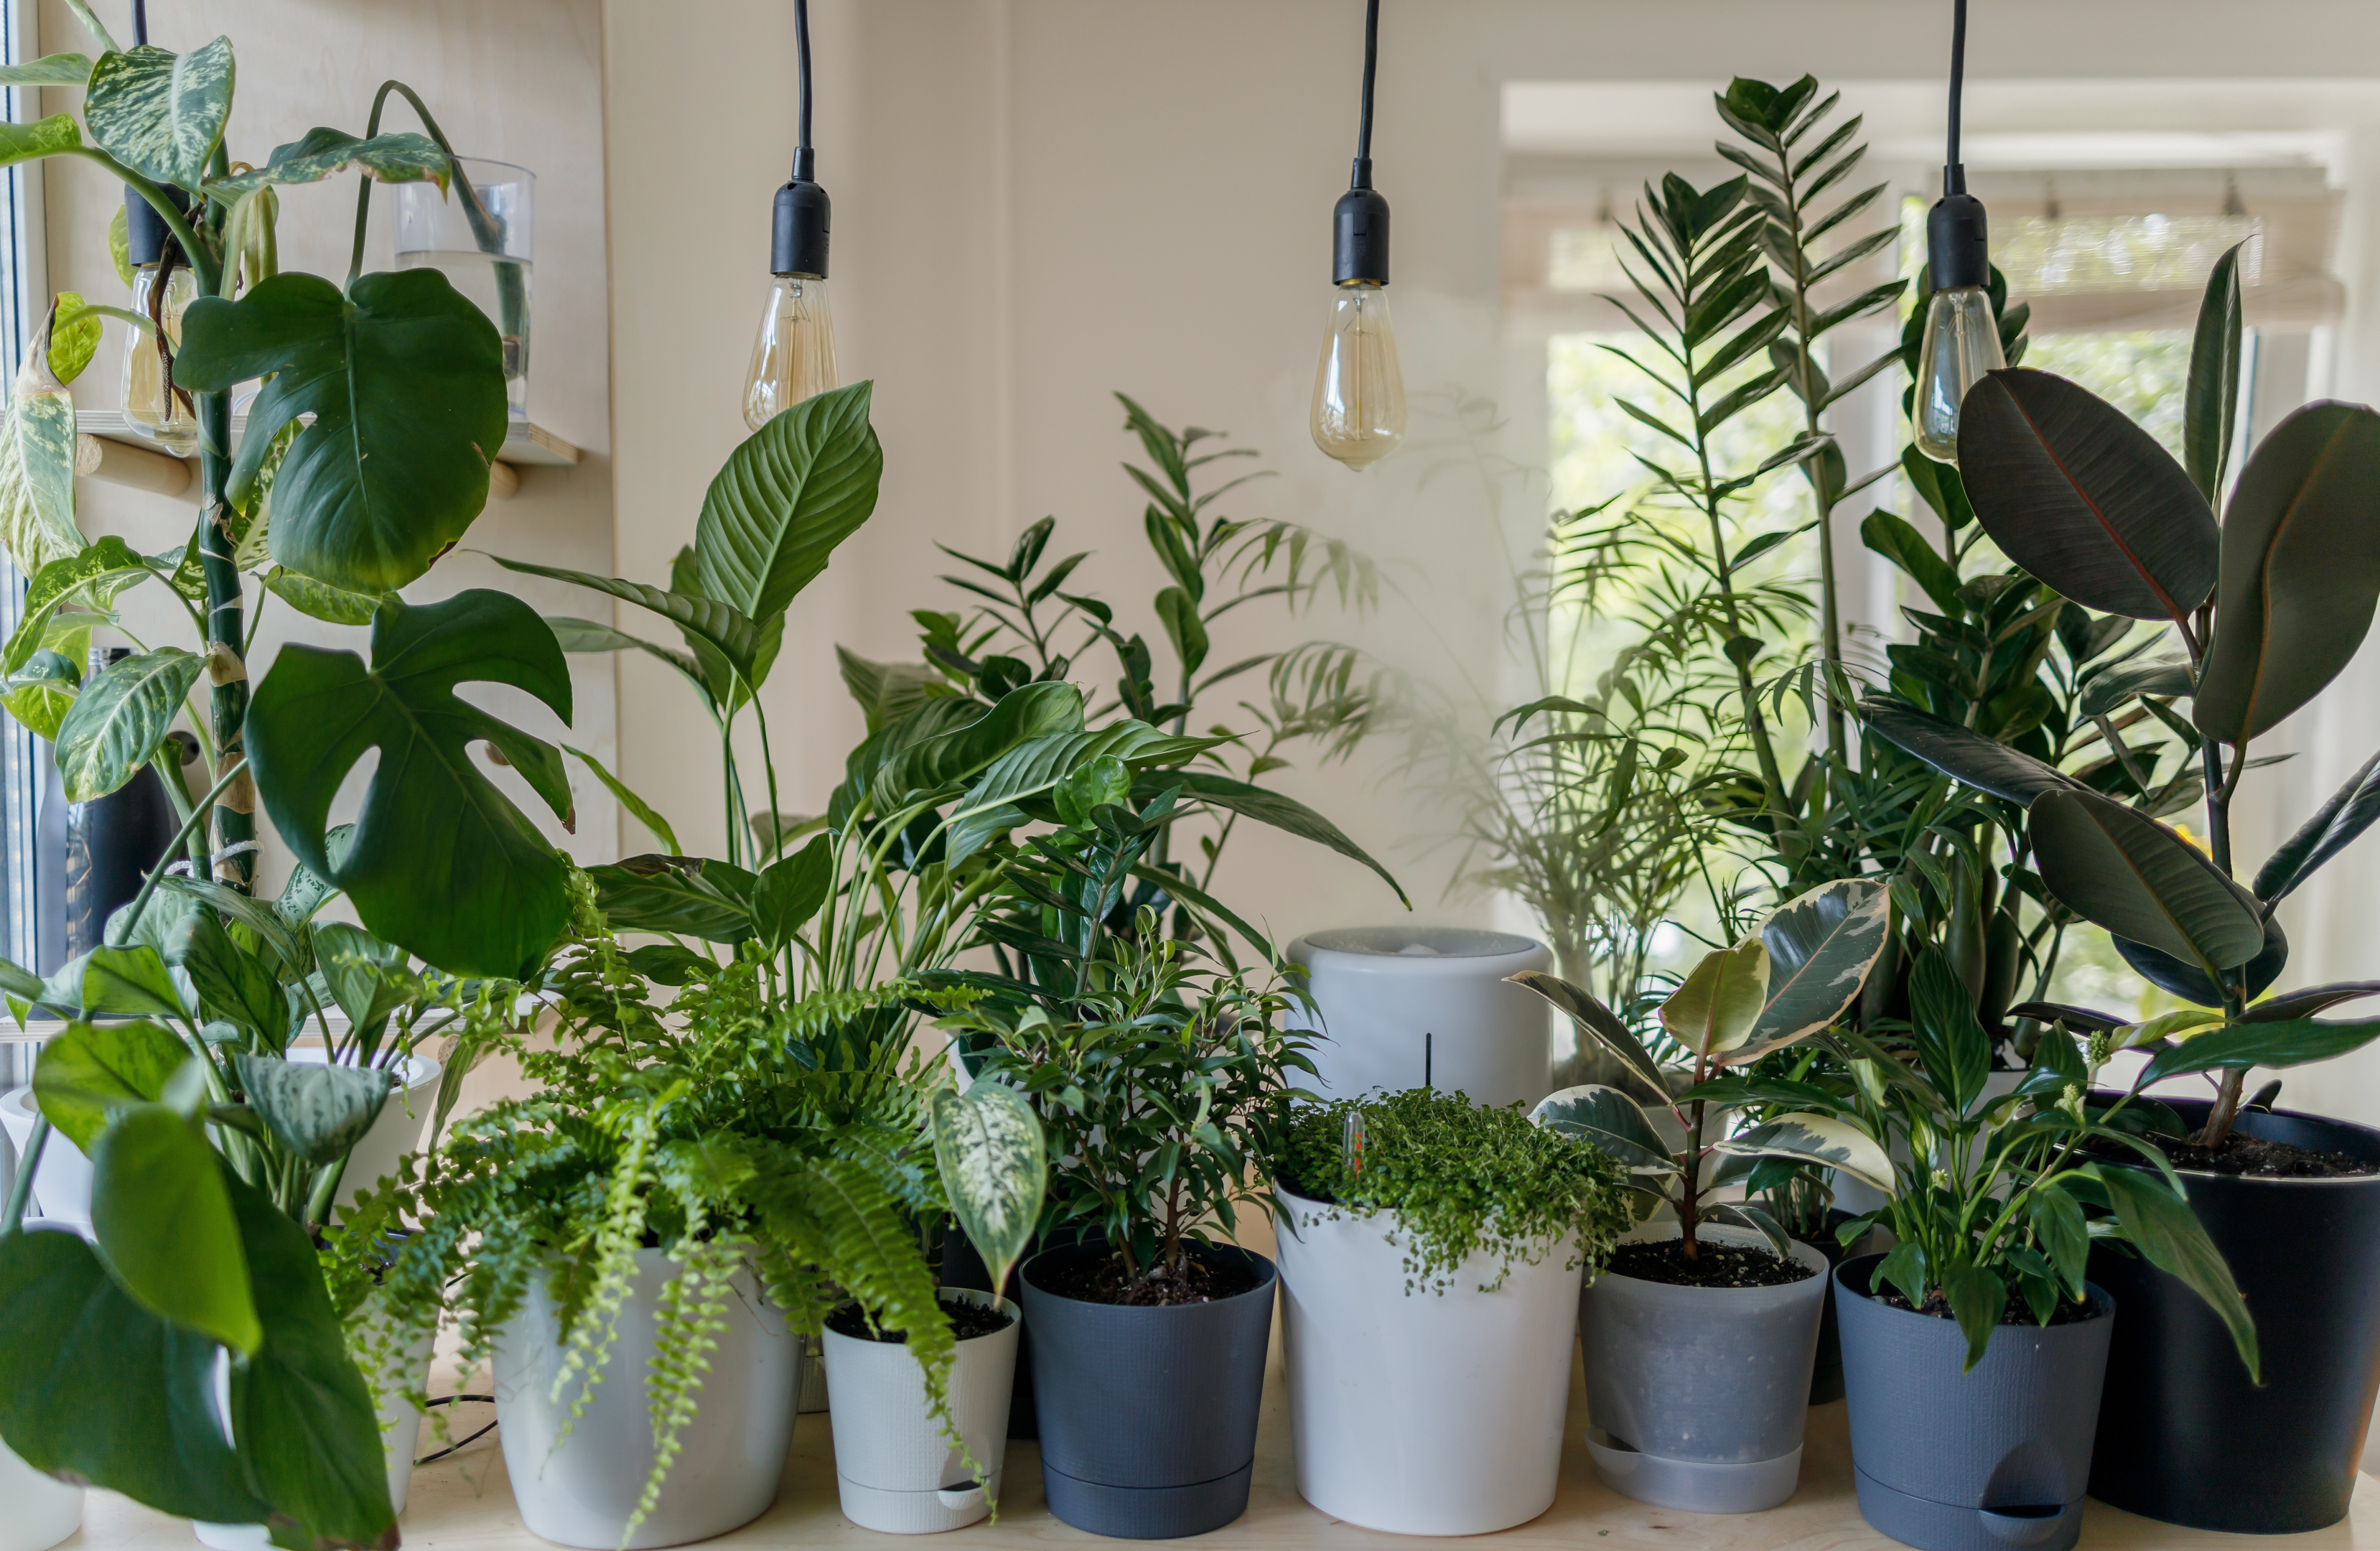 Interior landscape plants should be planted in moist soil and placed in direct sunlight